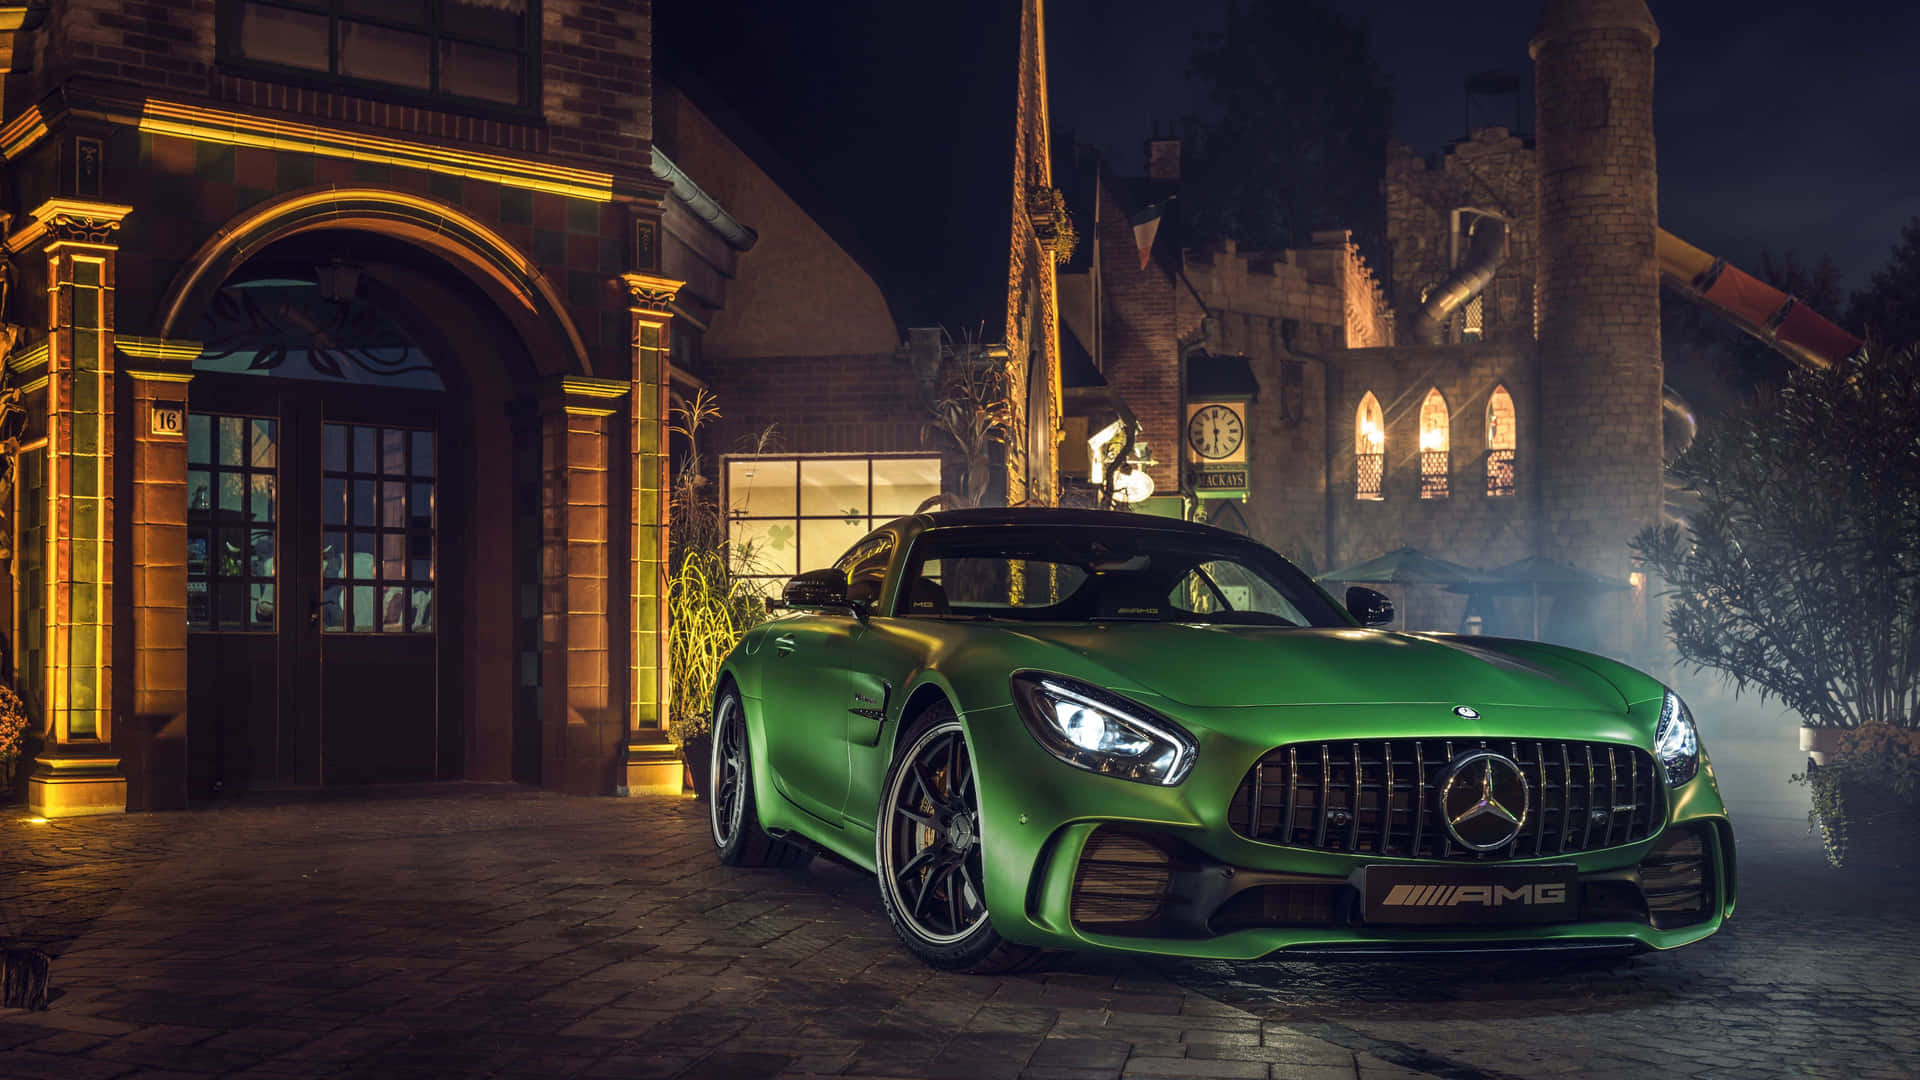 "Going Above and Beyond - Get Behind the Wheel of the Mercedes AMG GT" Wallpaper